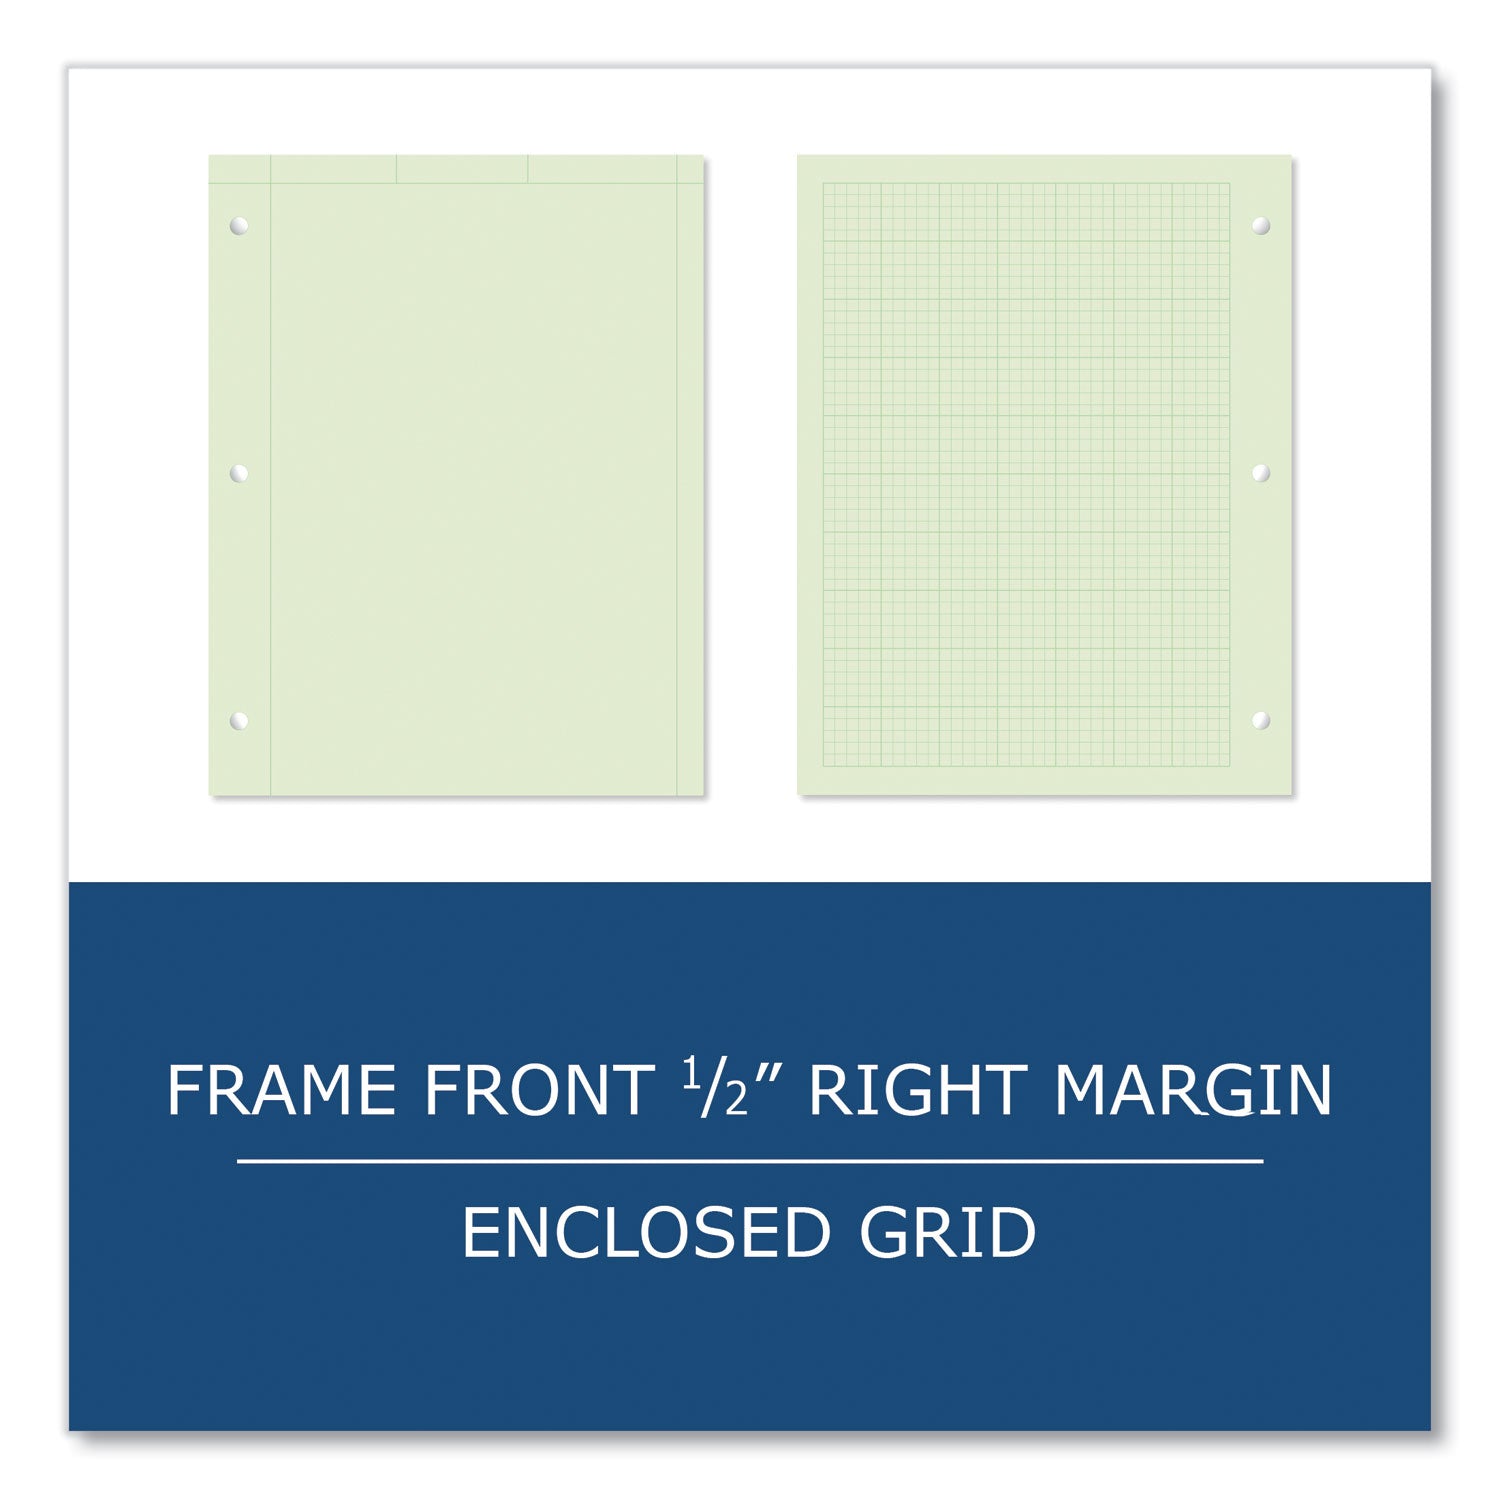 engineer-pad-05-margins-quad-rule-5-sq-in-1-sq-in-200-lt-green-85x11-sheets-pad-12-ct-ships-in-4-6-business-days_roa95389cs - 6